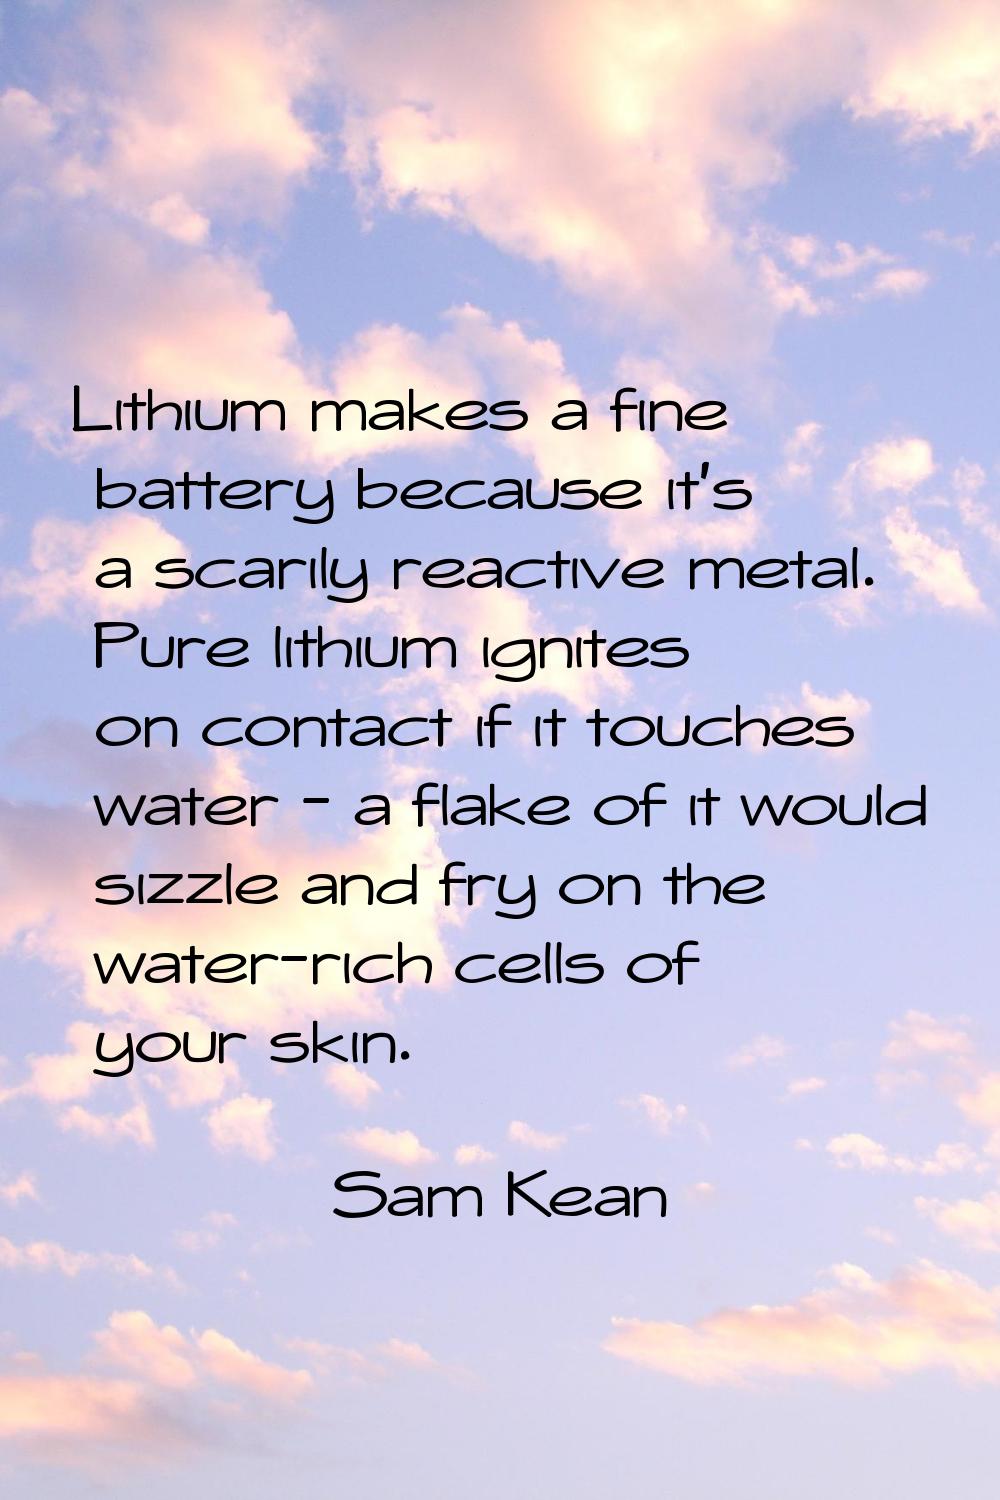 Lithium makes a fine battery because it's a scarily reactive metal. Pure lithium ignites on contact